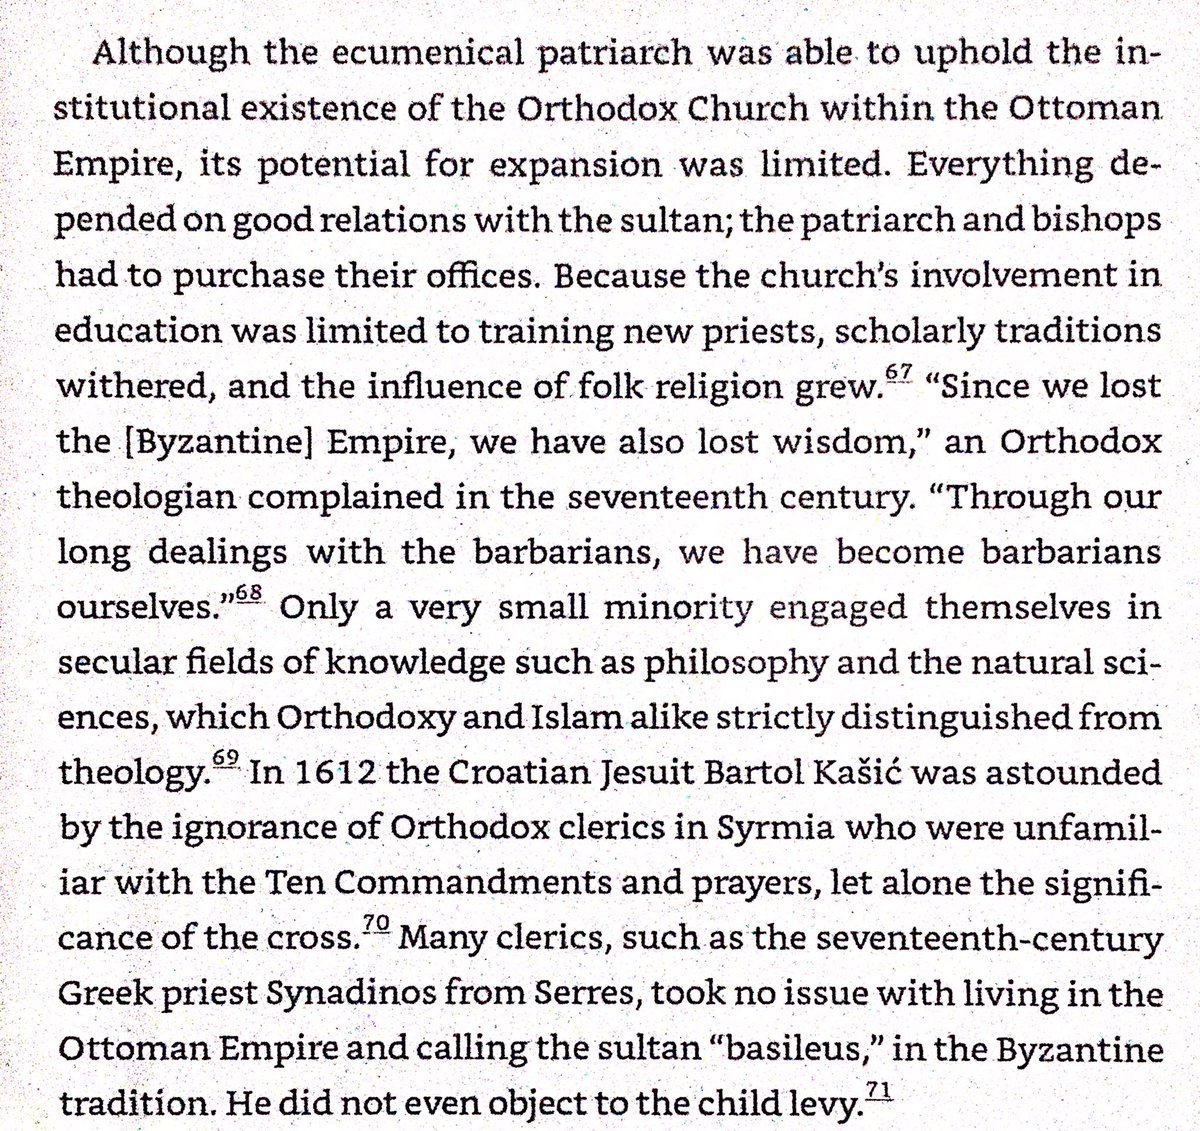 Orthodox Church’s activities were restricted, only able to maintain hierarchy & train priests. As result learning withered, & by 1600s some priests didn’t understand importance of the cross or what the 10 Commandments were.